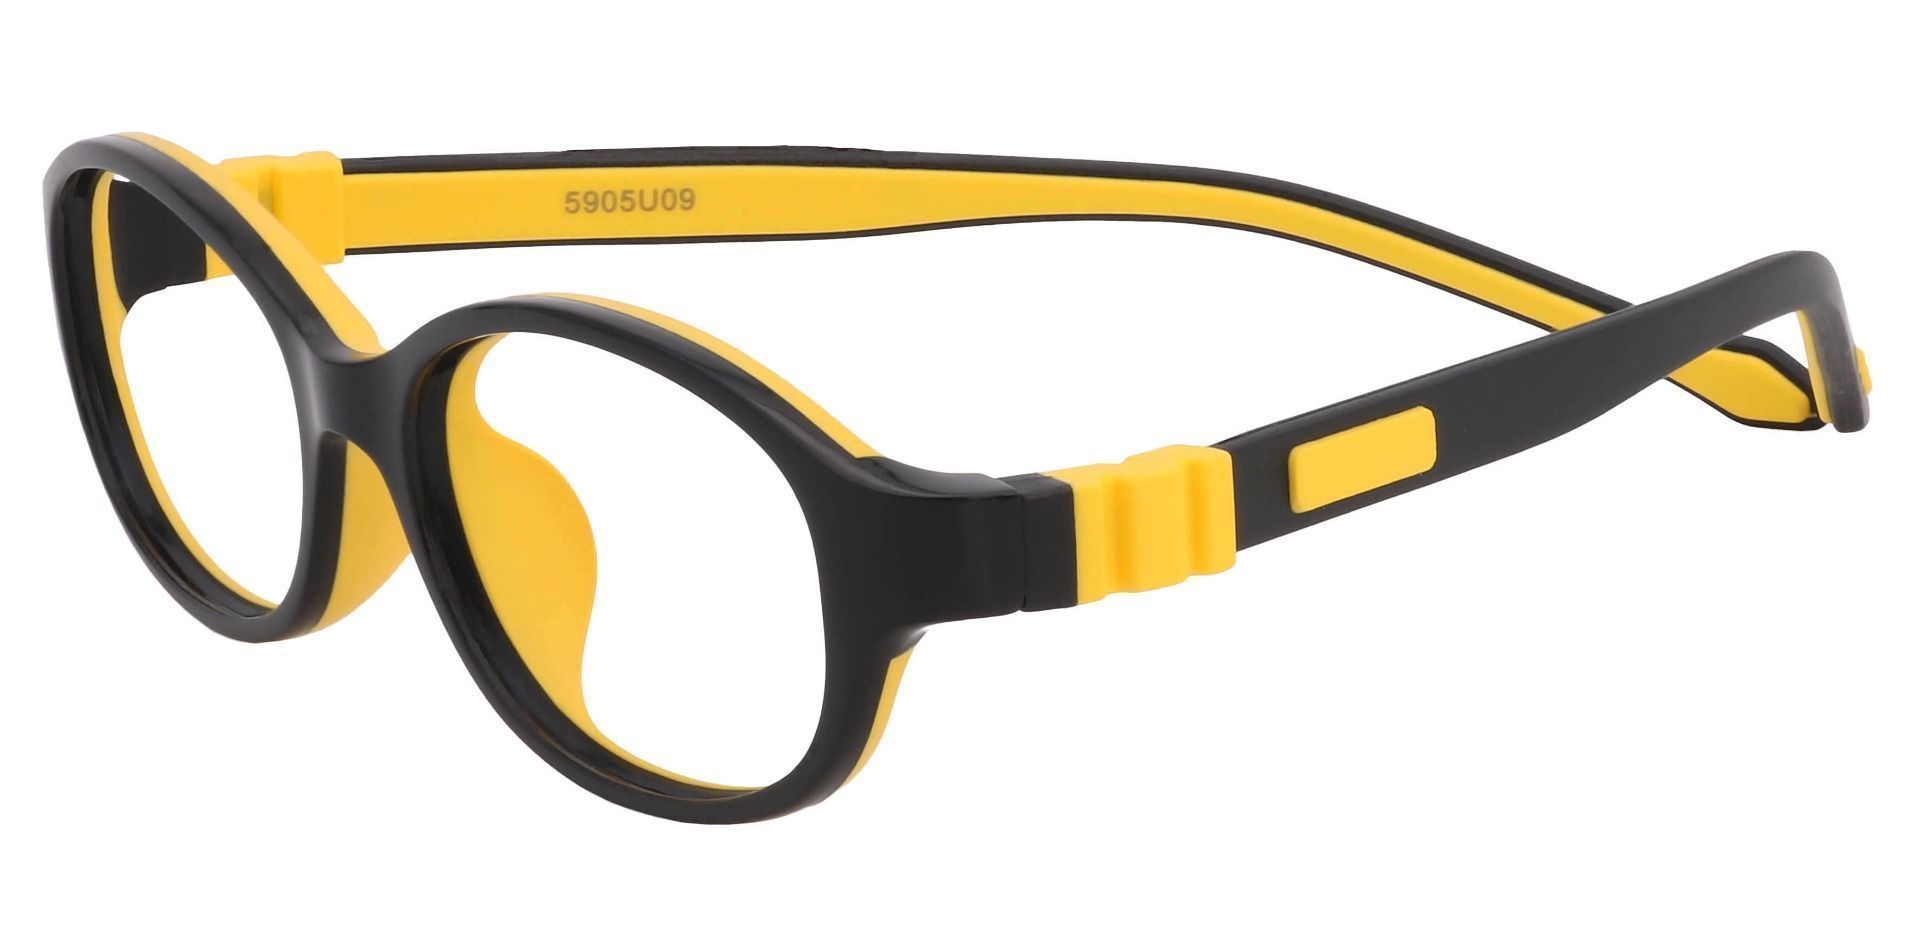 Stone Oval Reading Glasses - The Frame Is Black And Yellow